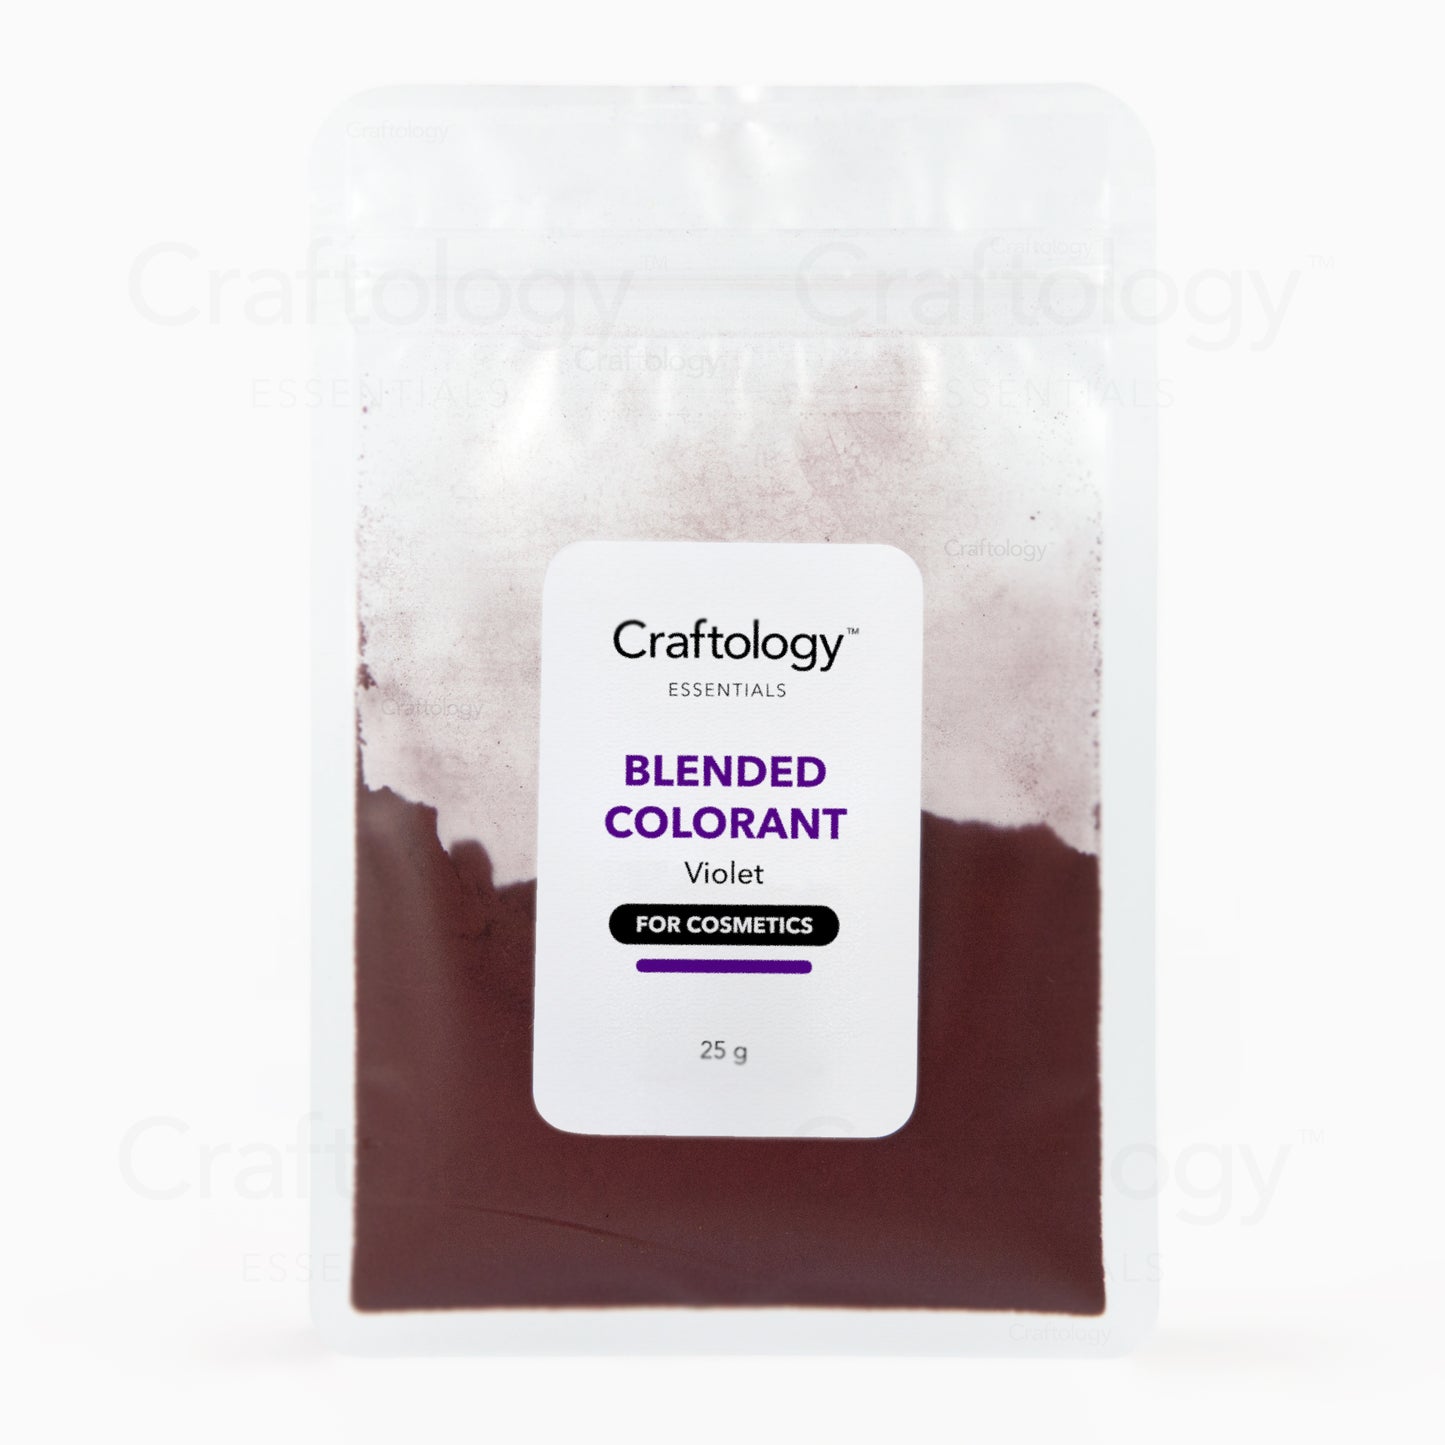 Blended Colorant - Violet - Craftology Essentials - Philippines